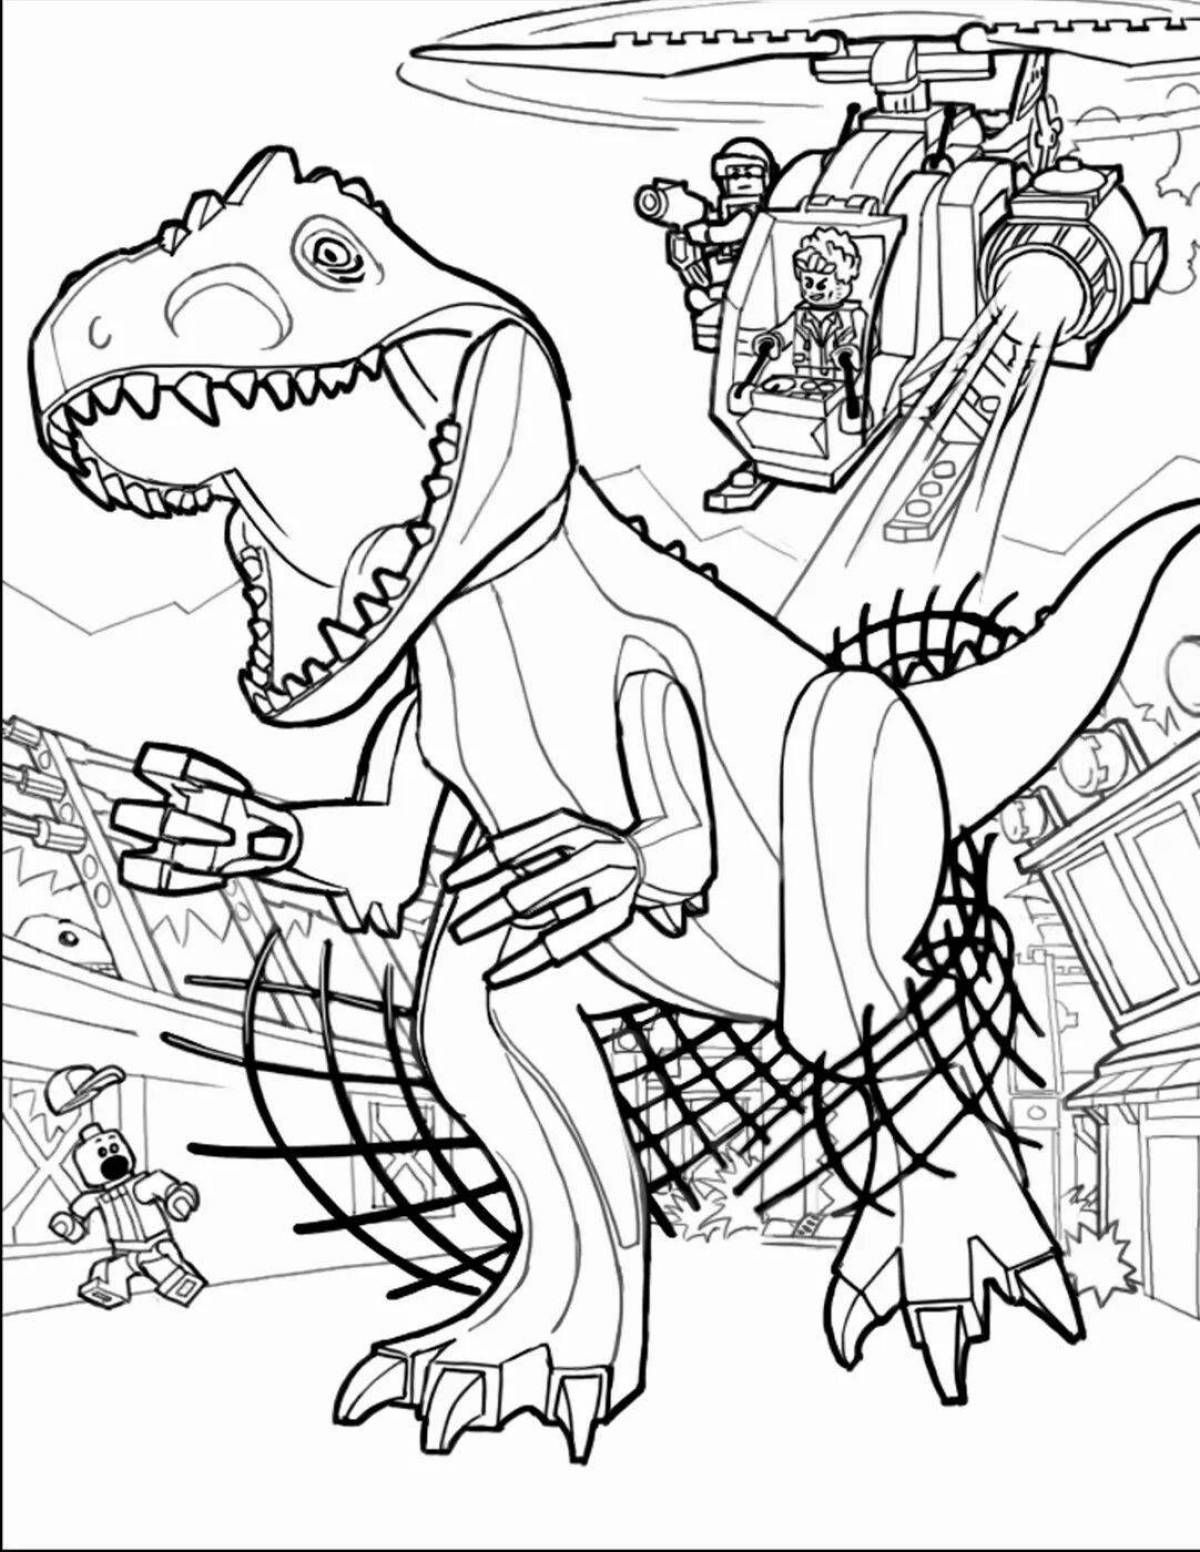 Colorful jurassic park coloring book for kids